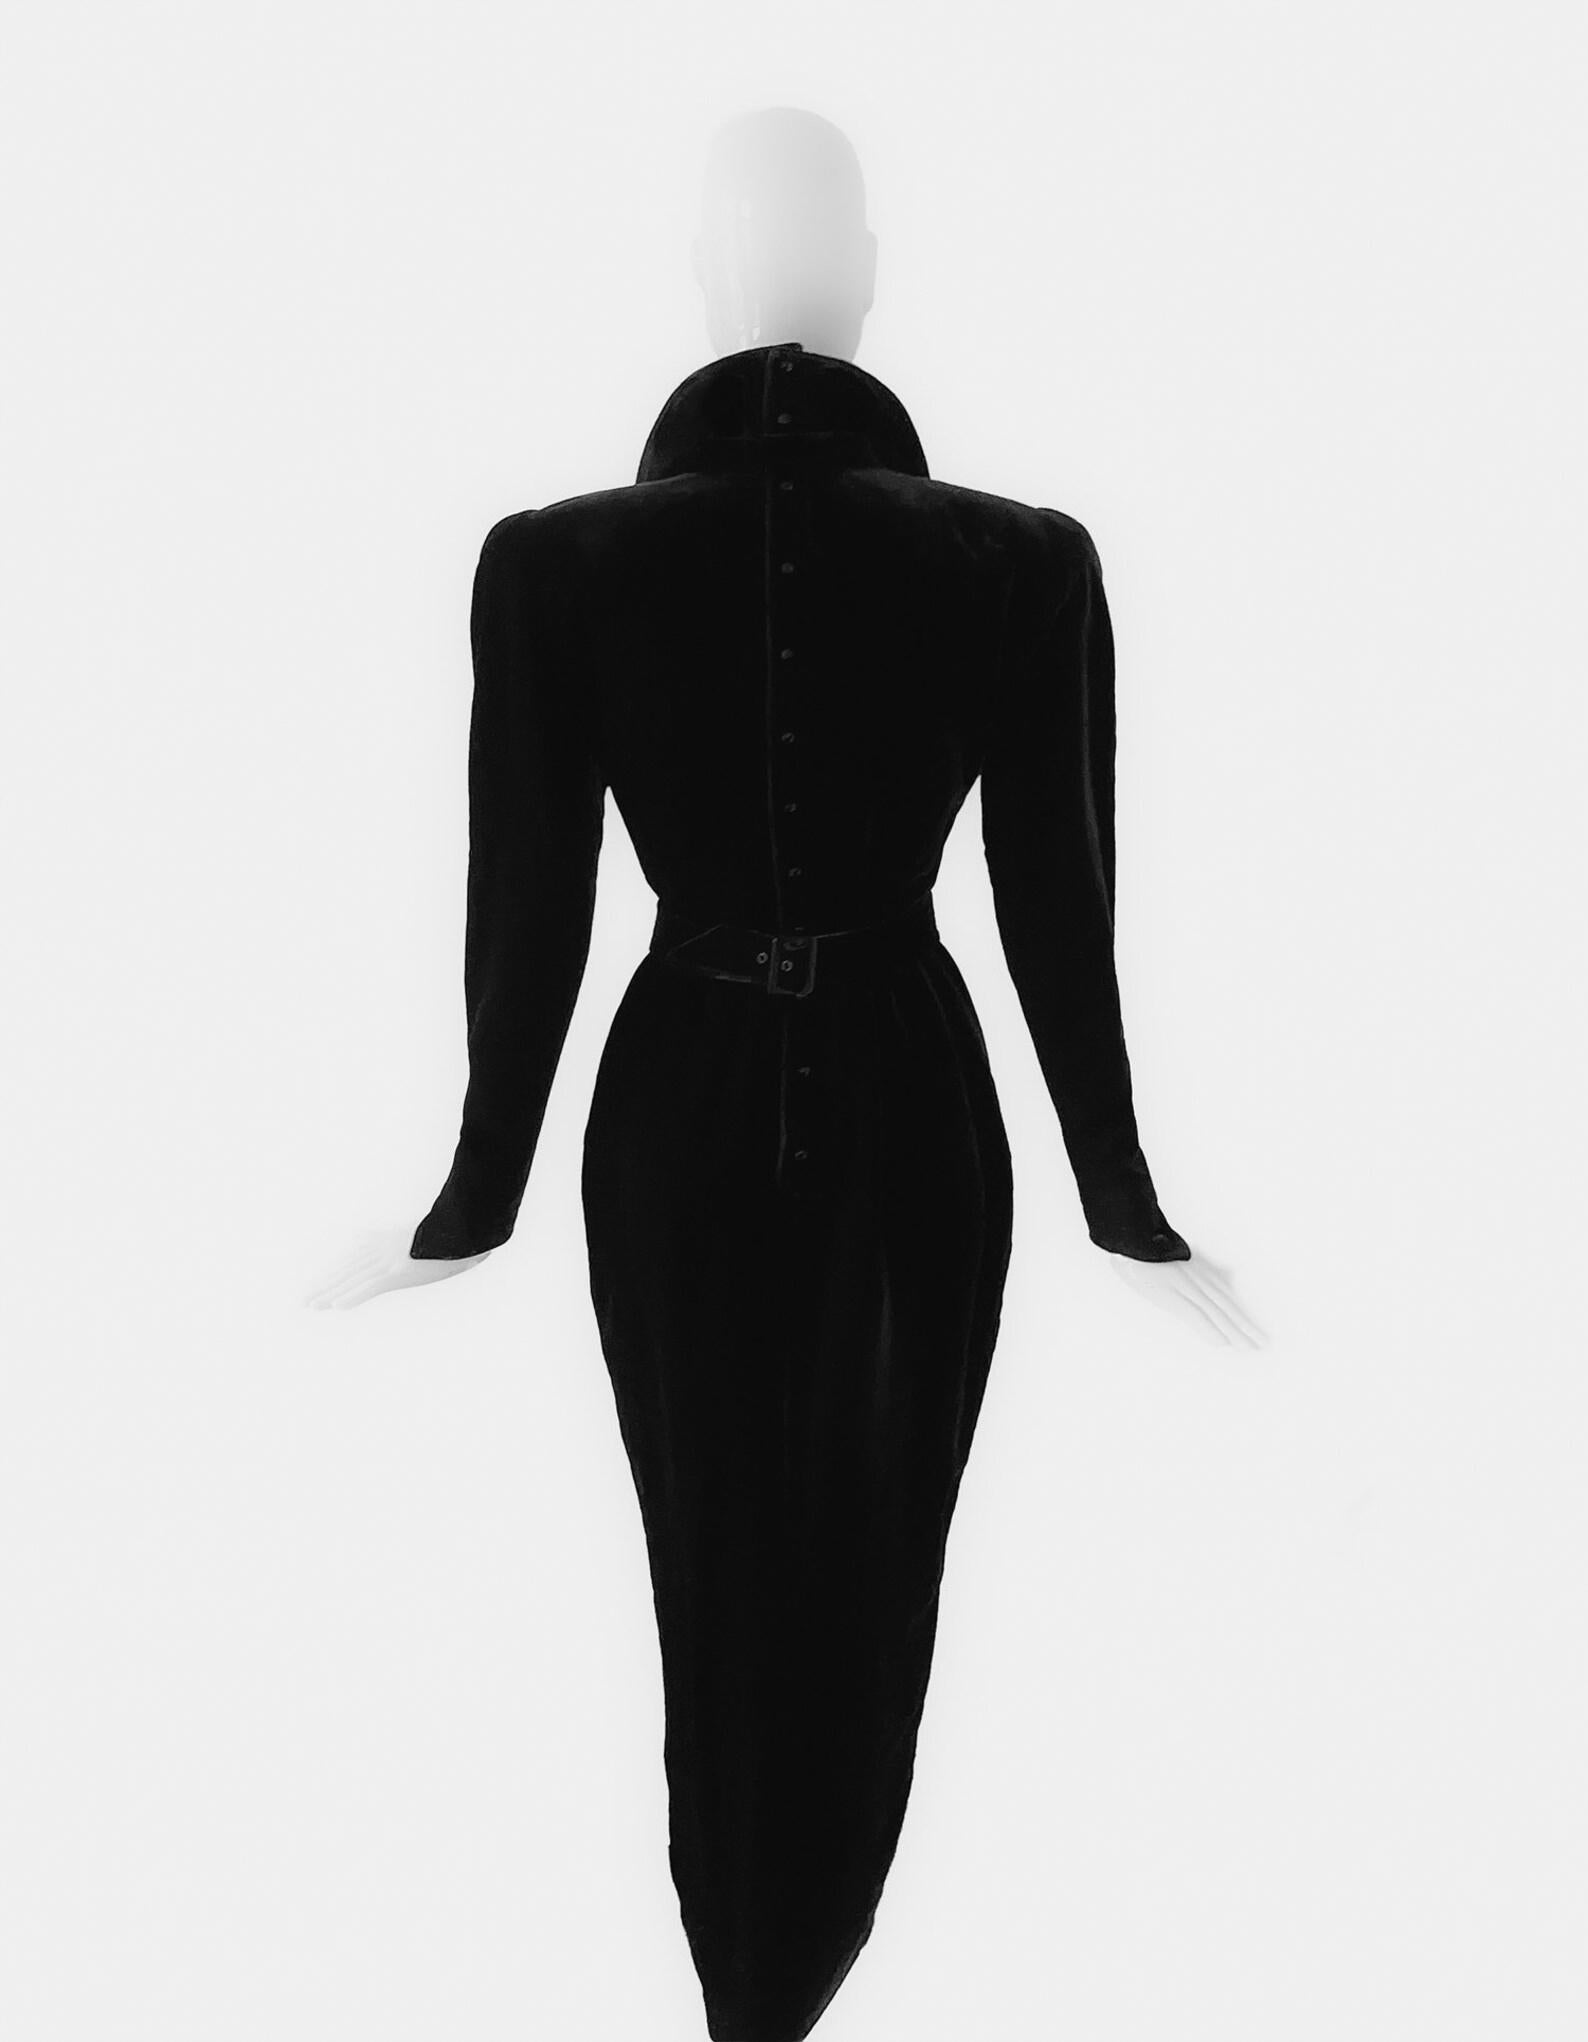 Stunning Thierry Mugler Archival  FW 1986 Evening Gown Crytsal Black Dress  For Sale 10